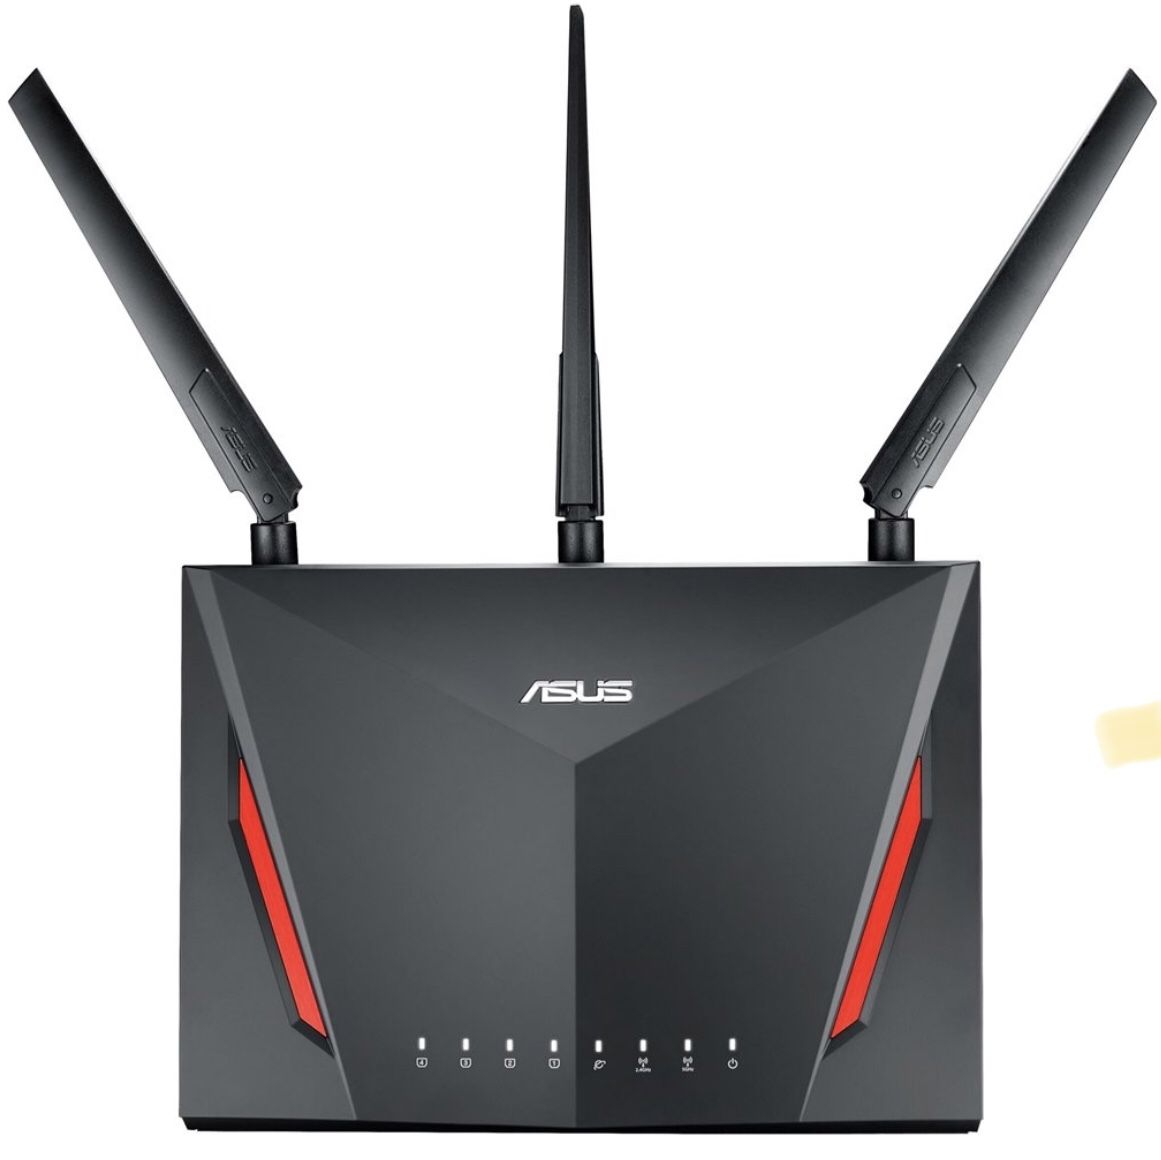 Asus AC2900 dual-band Wi-Fi router (RT-AC86U)